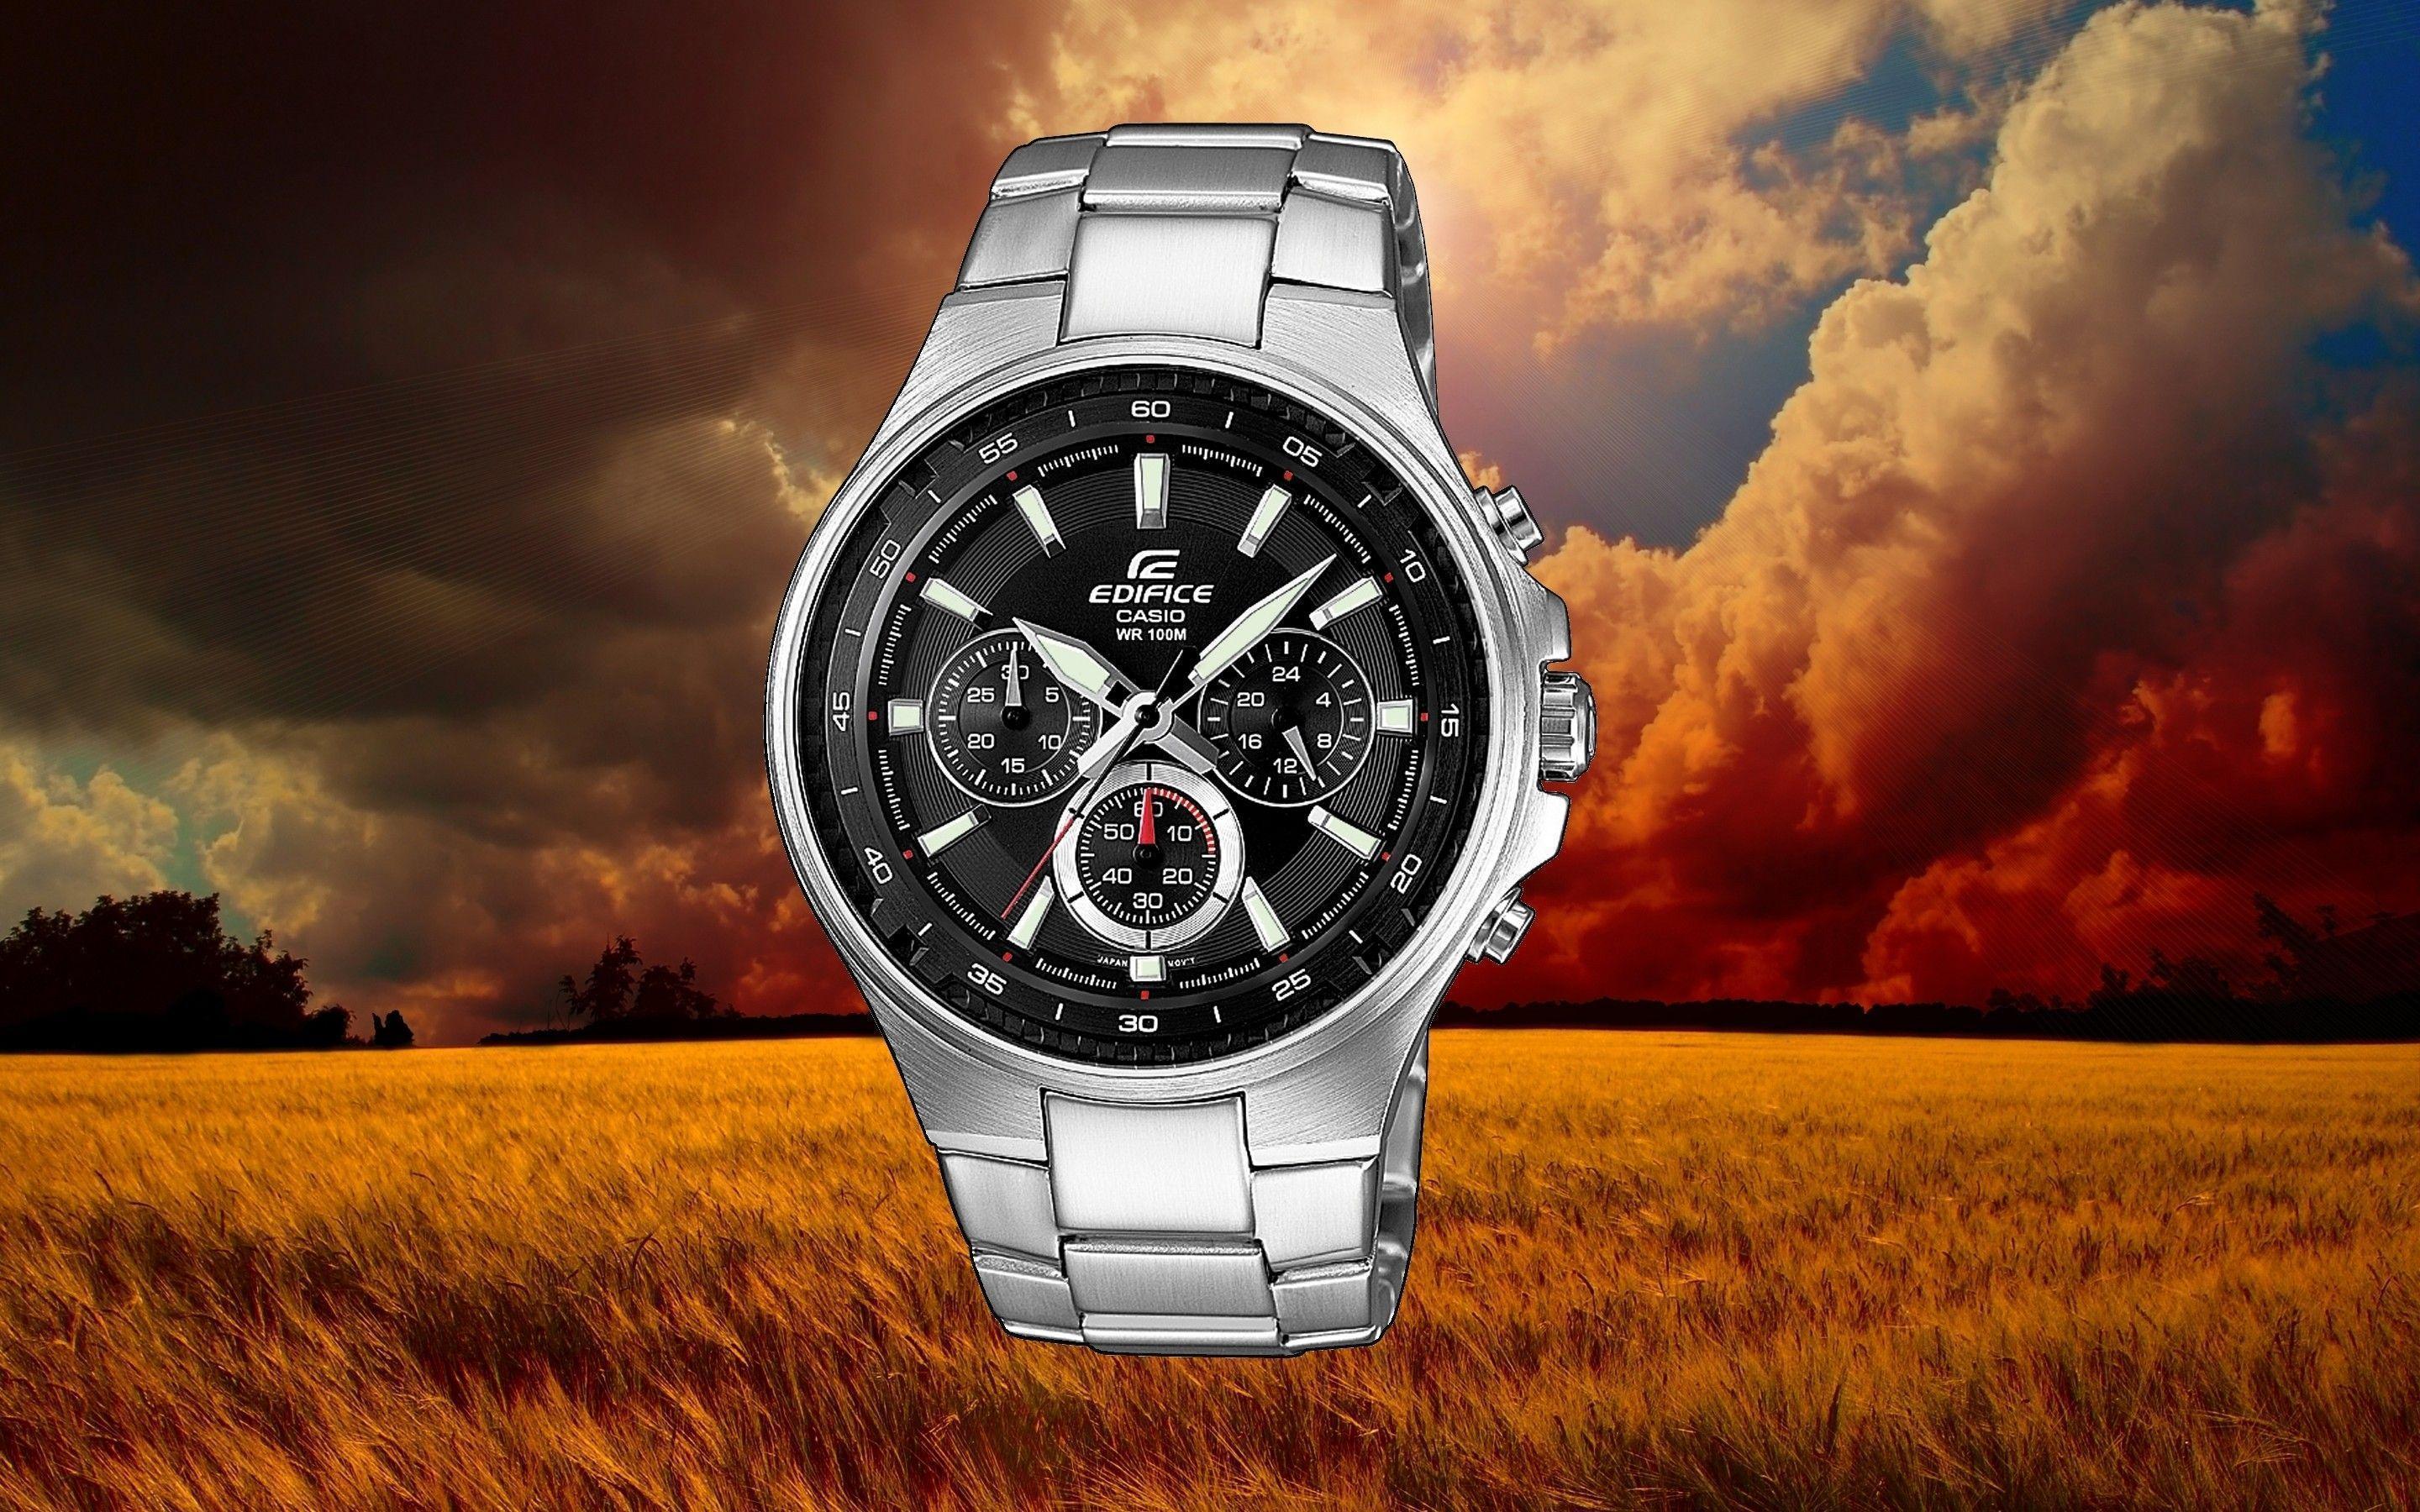 Sunsets: Watch Casio Grain Sunset Clouds Wallpapers For Desktop for